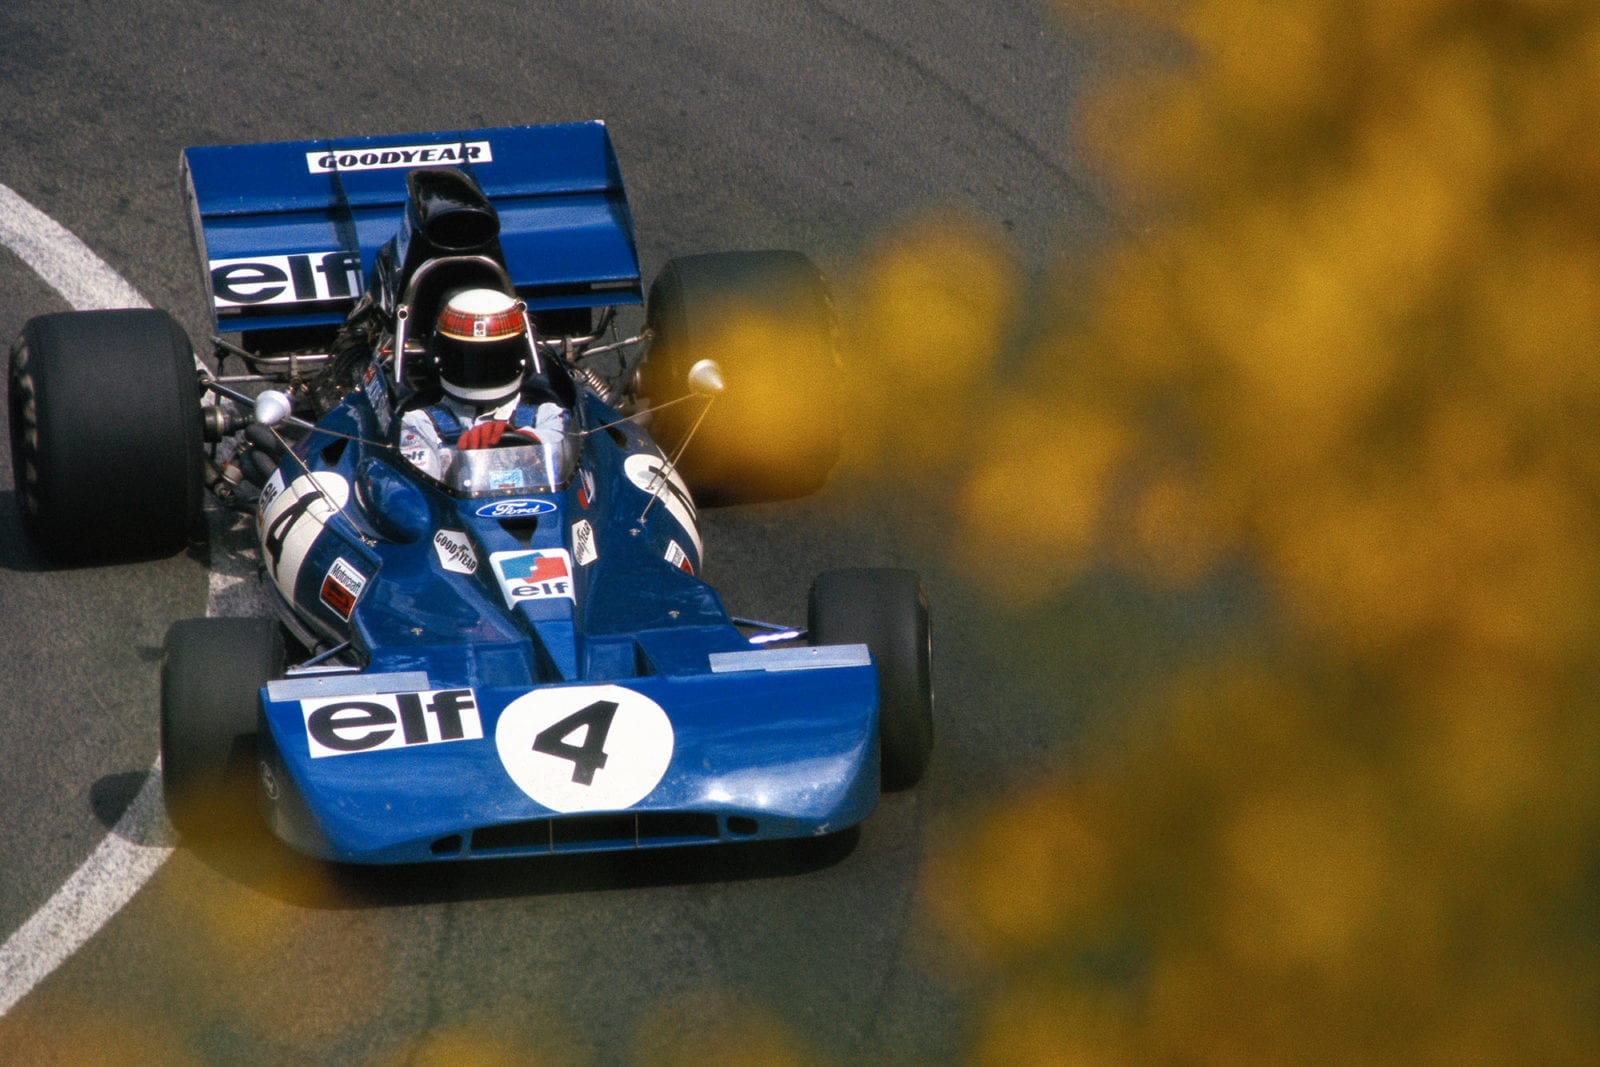 Jackie Stewart driving for Tyrrell at the 1972 French Grand Prix.